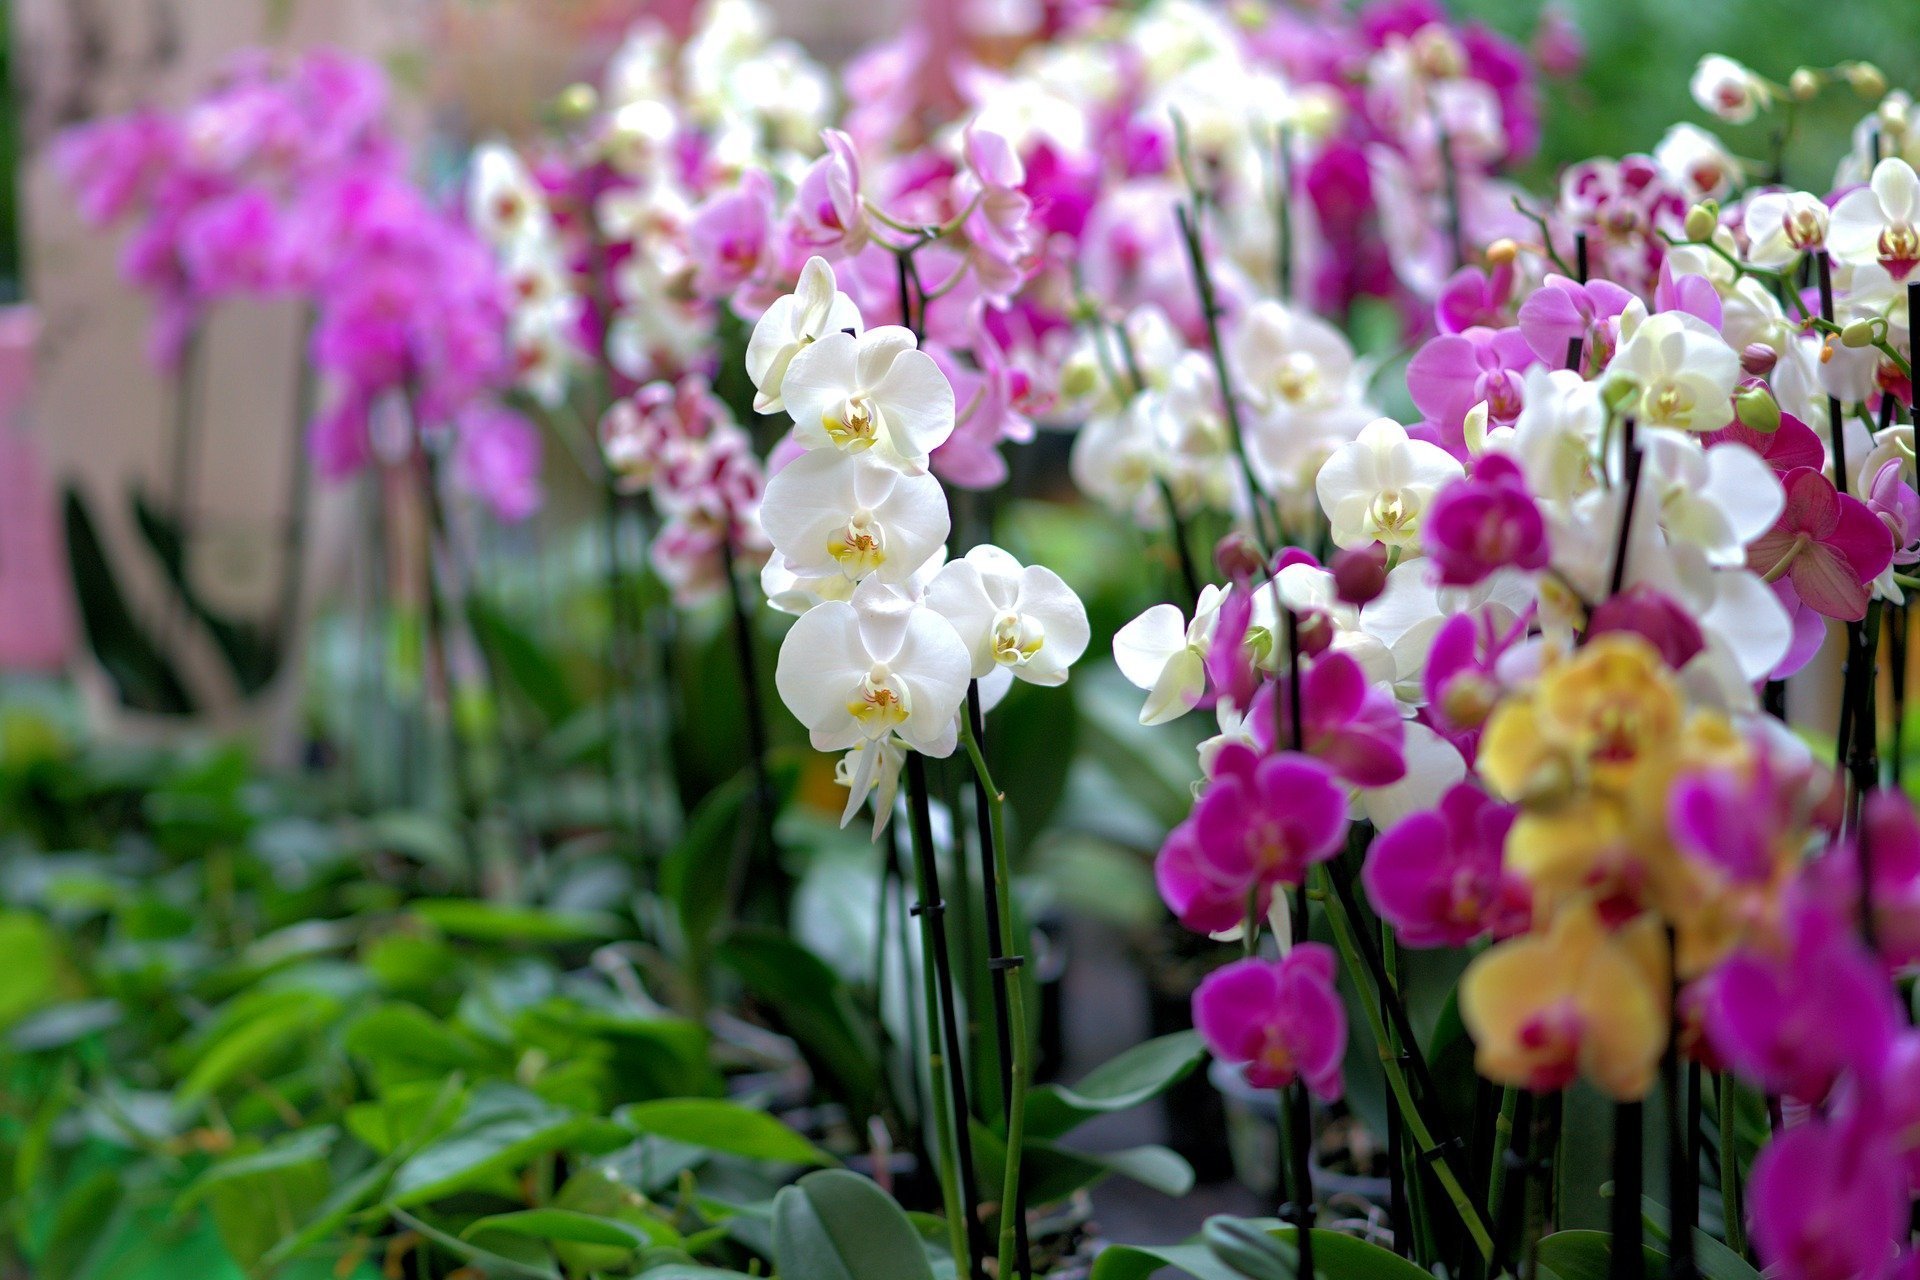 Field of multi-colored orchids. | Source: Pixabay